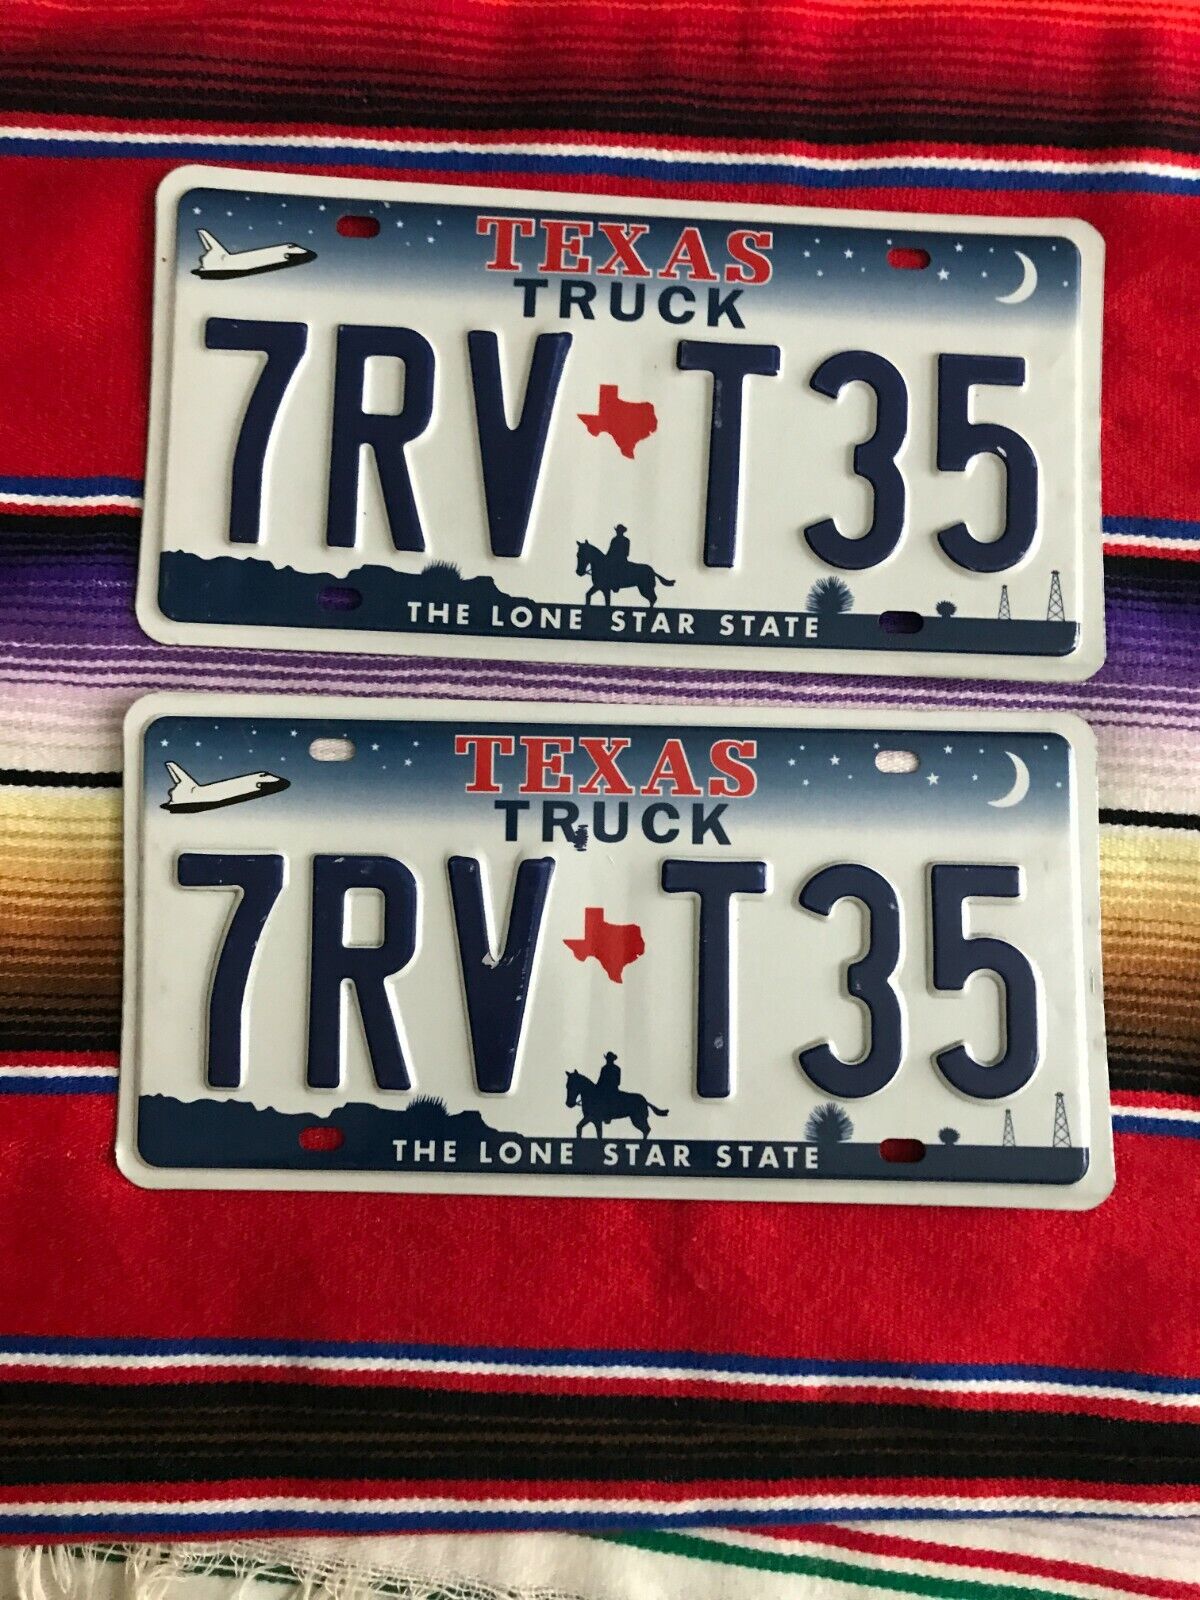 2000-2001-2002-2003-2004-TRUCK LICENSE PLATES SPACE SHUTTLE NO FLAG 7RVT35